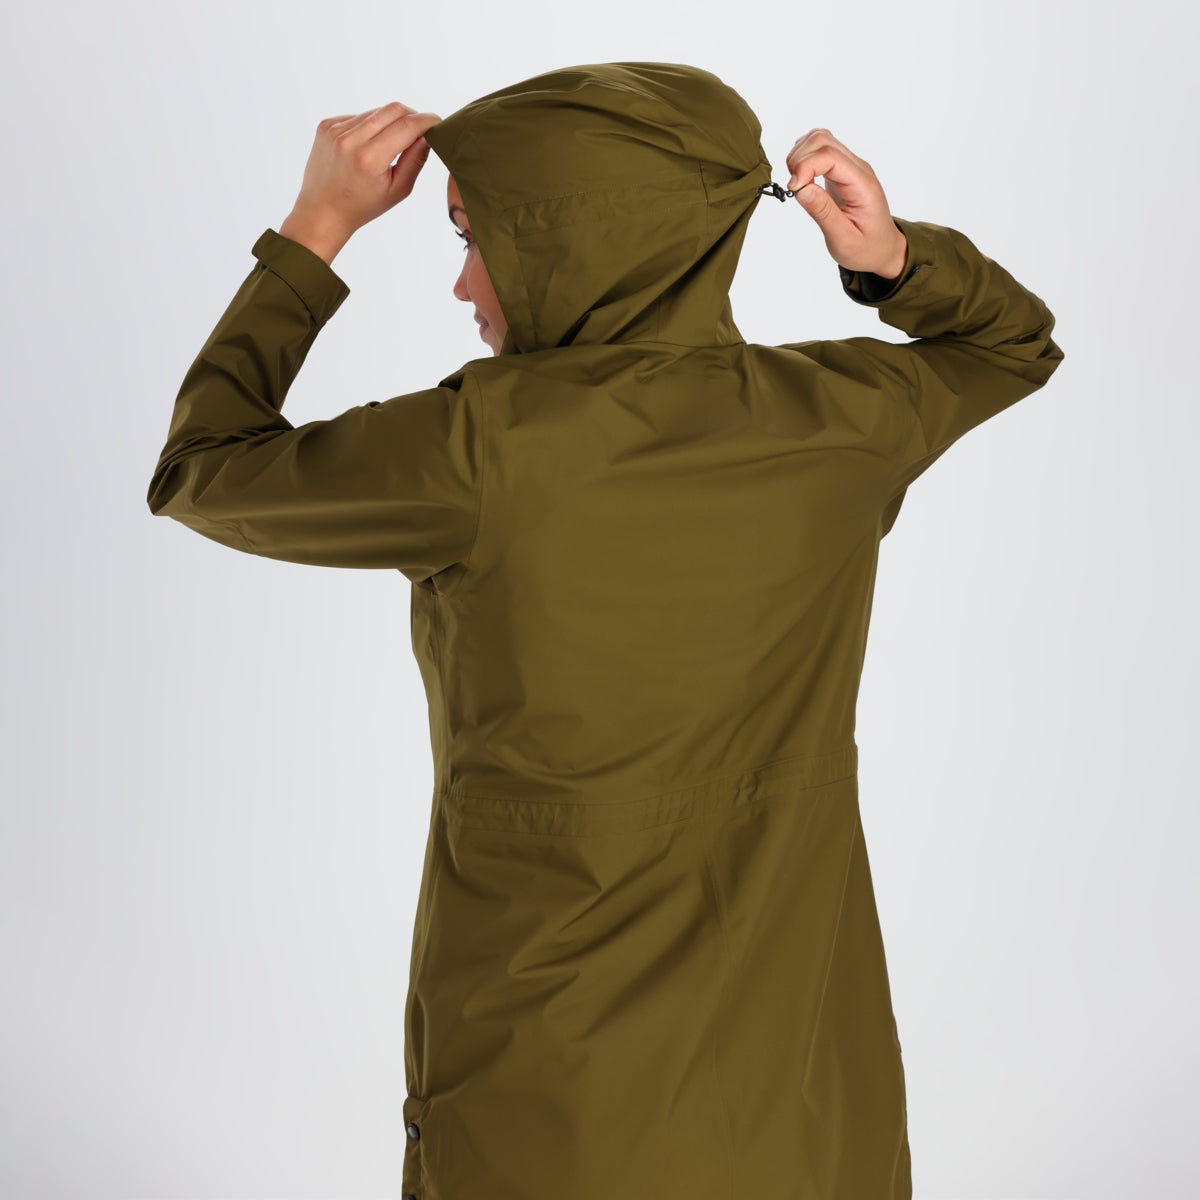 00 :: Hood Lock / Easily cinch your excess hood fabric for a customizable fit with or without helmet.